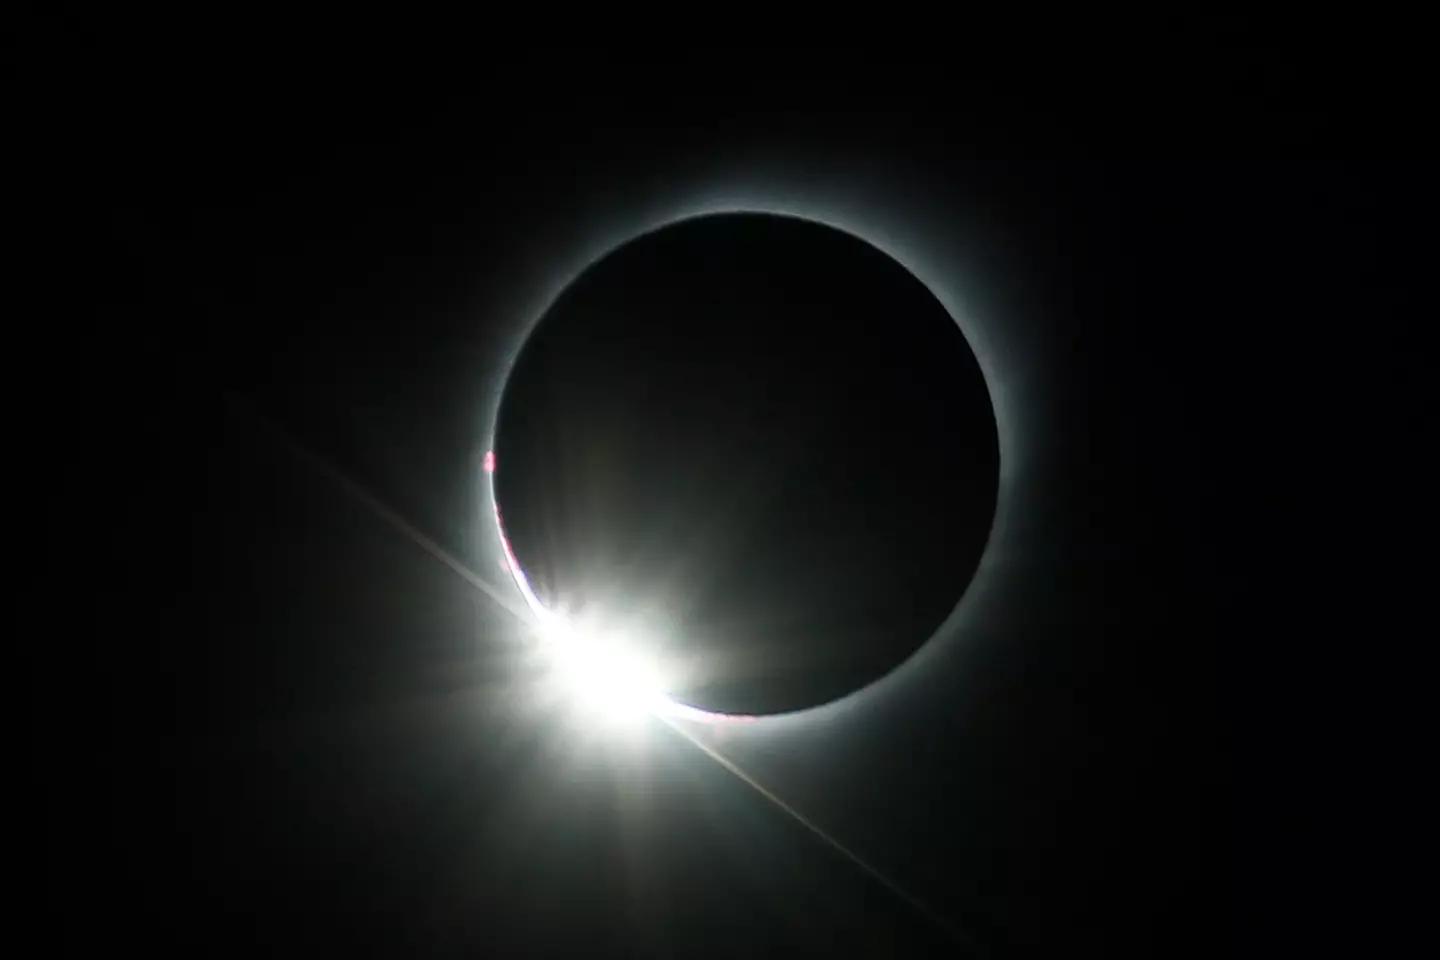 The longest total solar eclipse on record lasted over seven minutes.